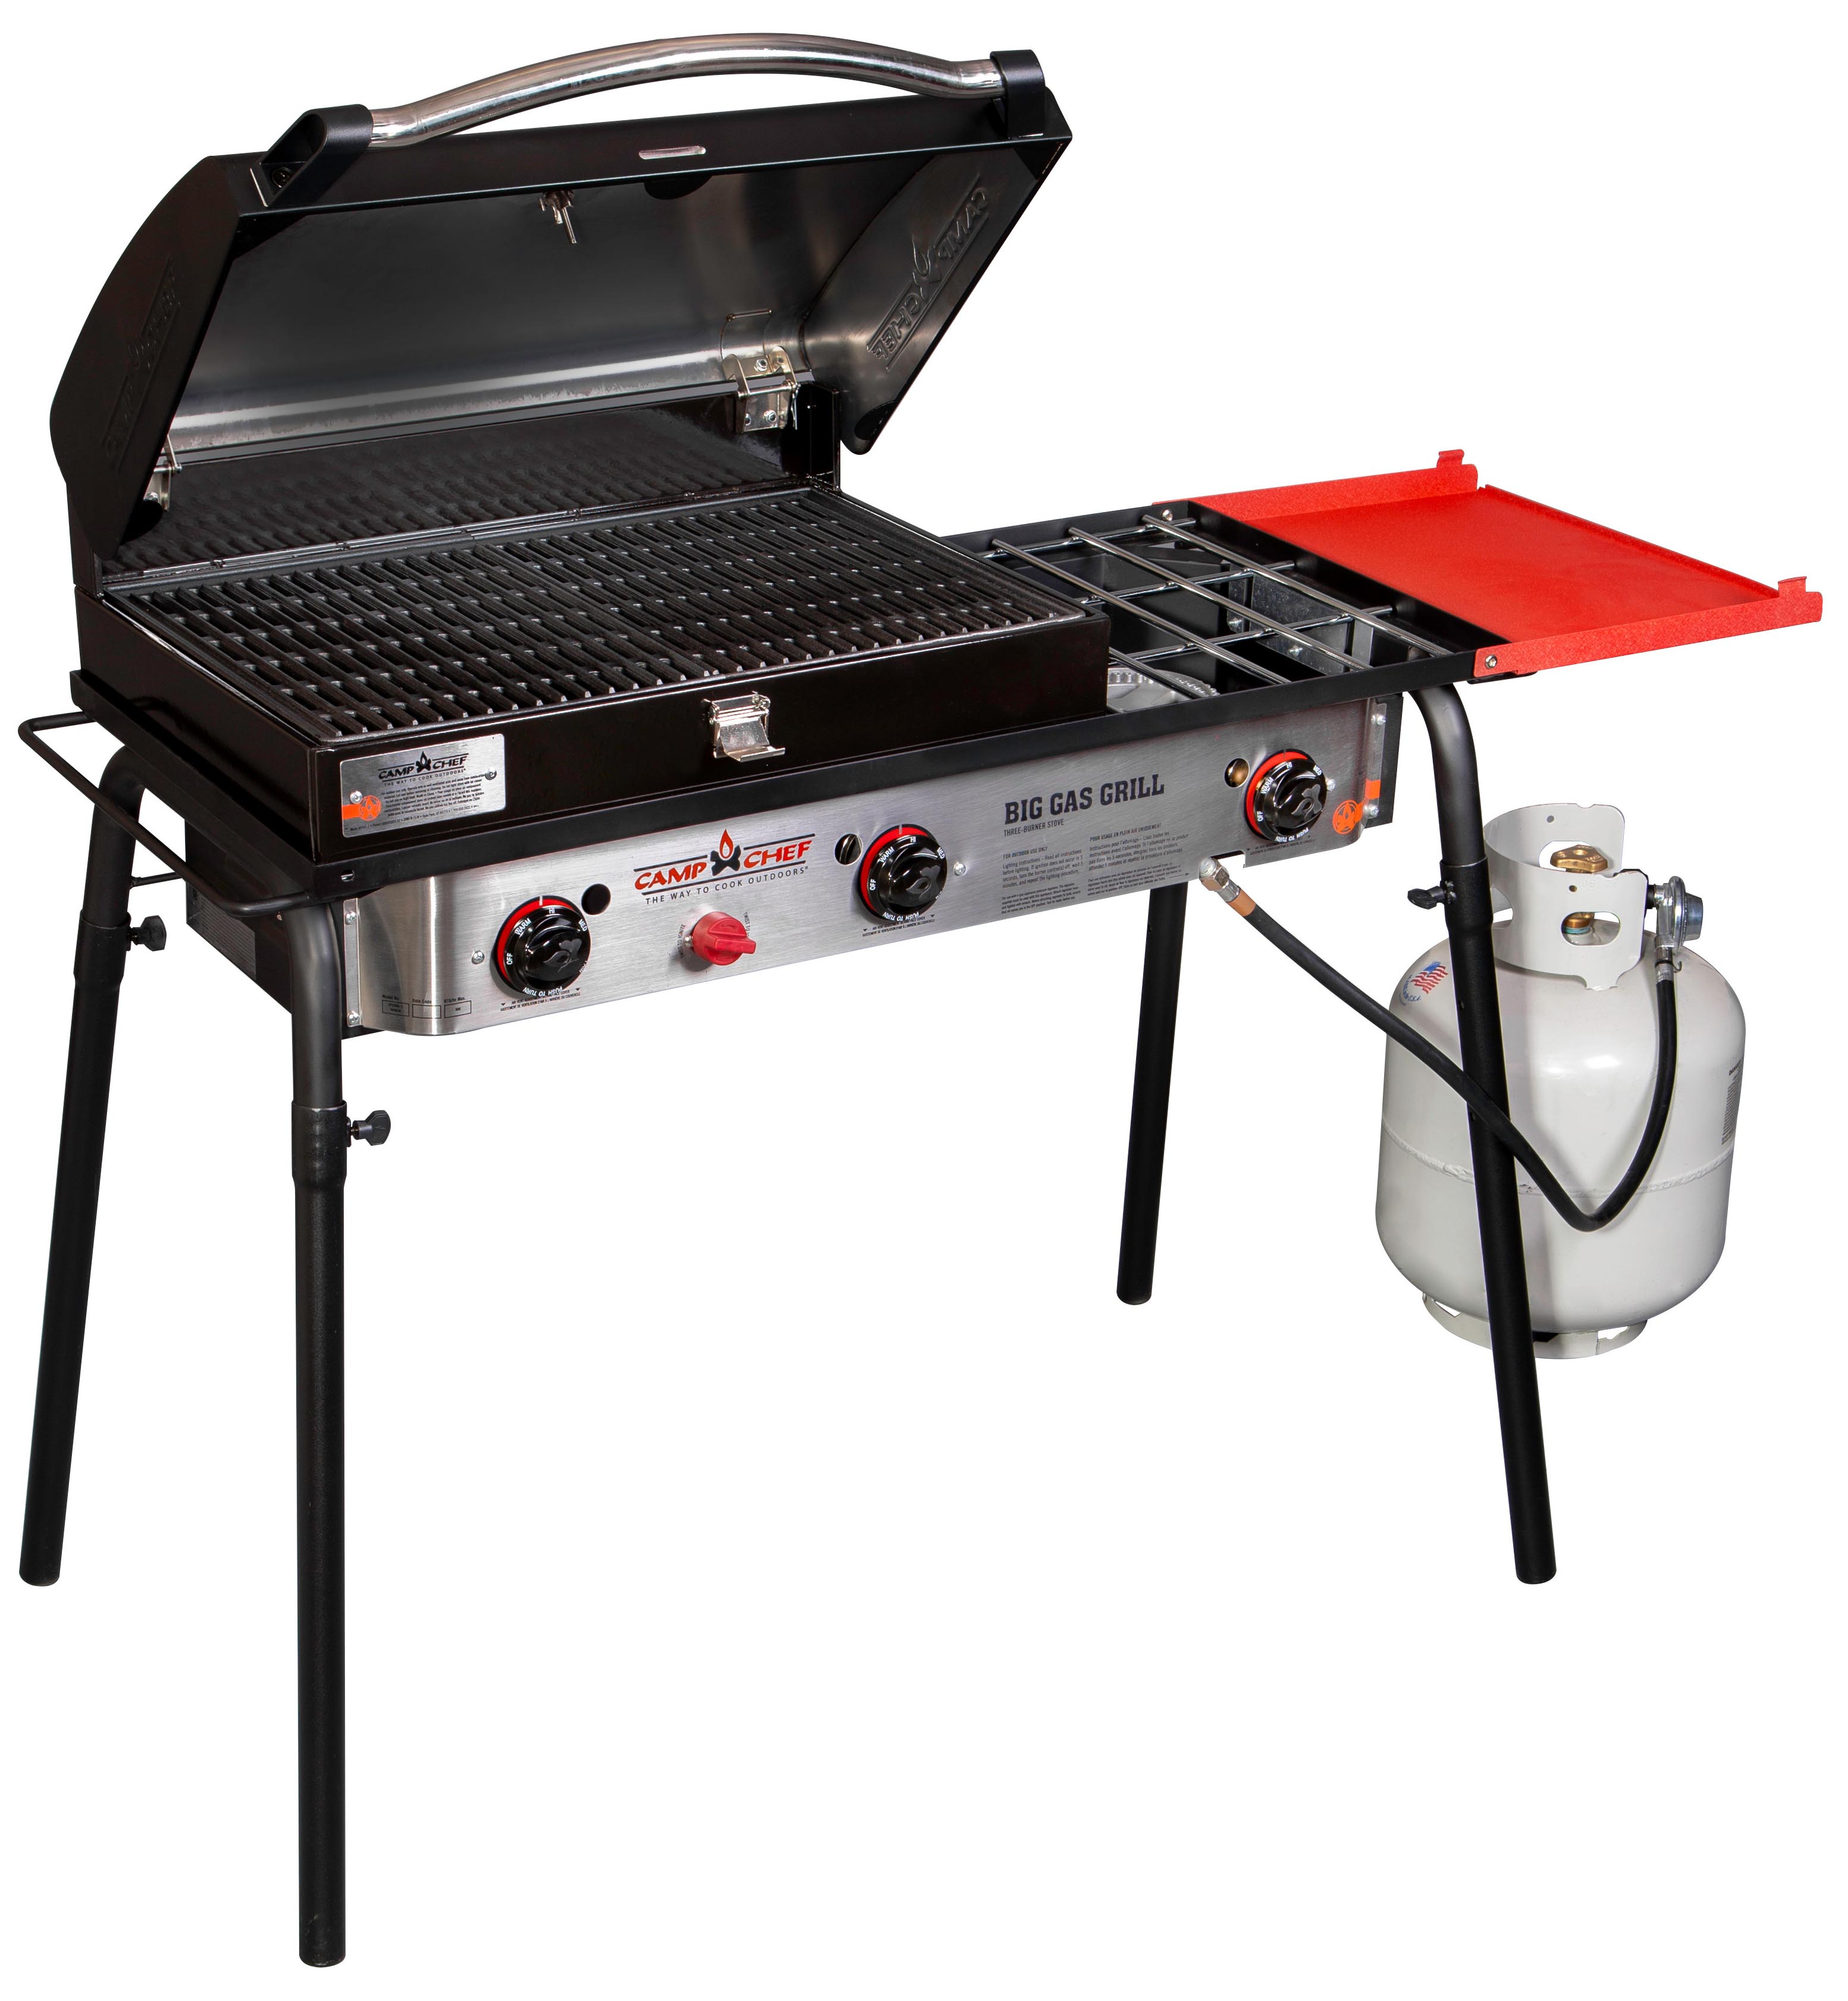 Camp Chef Big Gas Grill 16 Outdoor Stove with BBQ Box Accessory, SPG90B, 90,000 BTU Propane - image 1 of 17